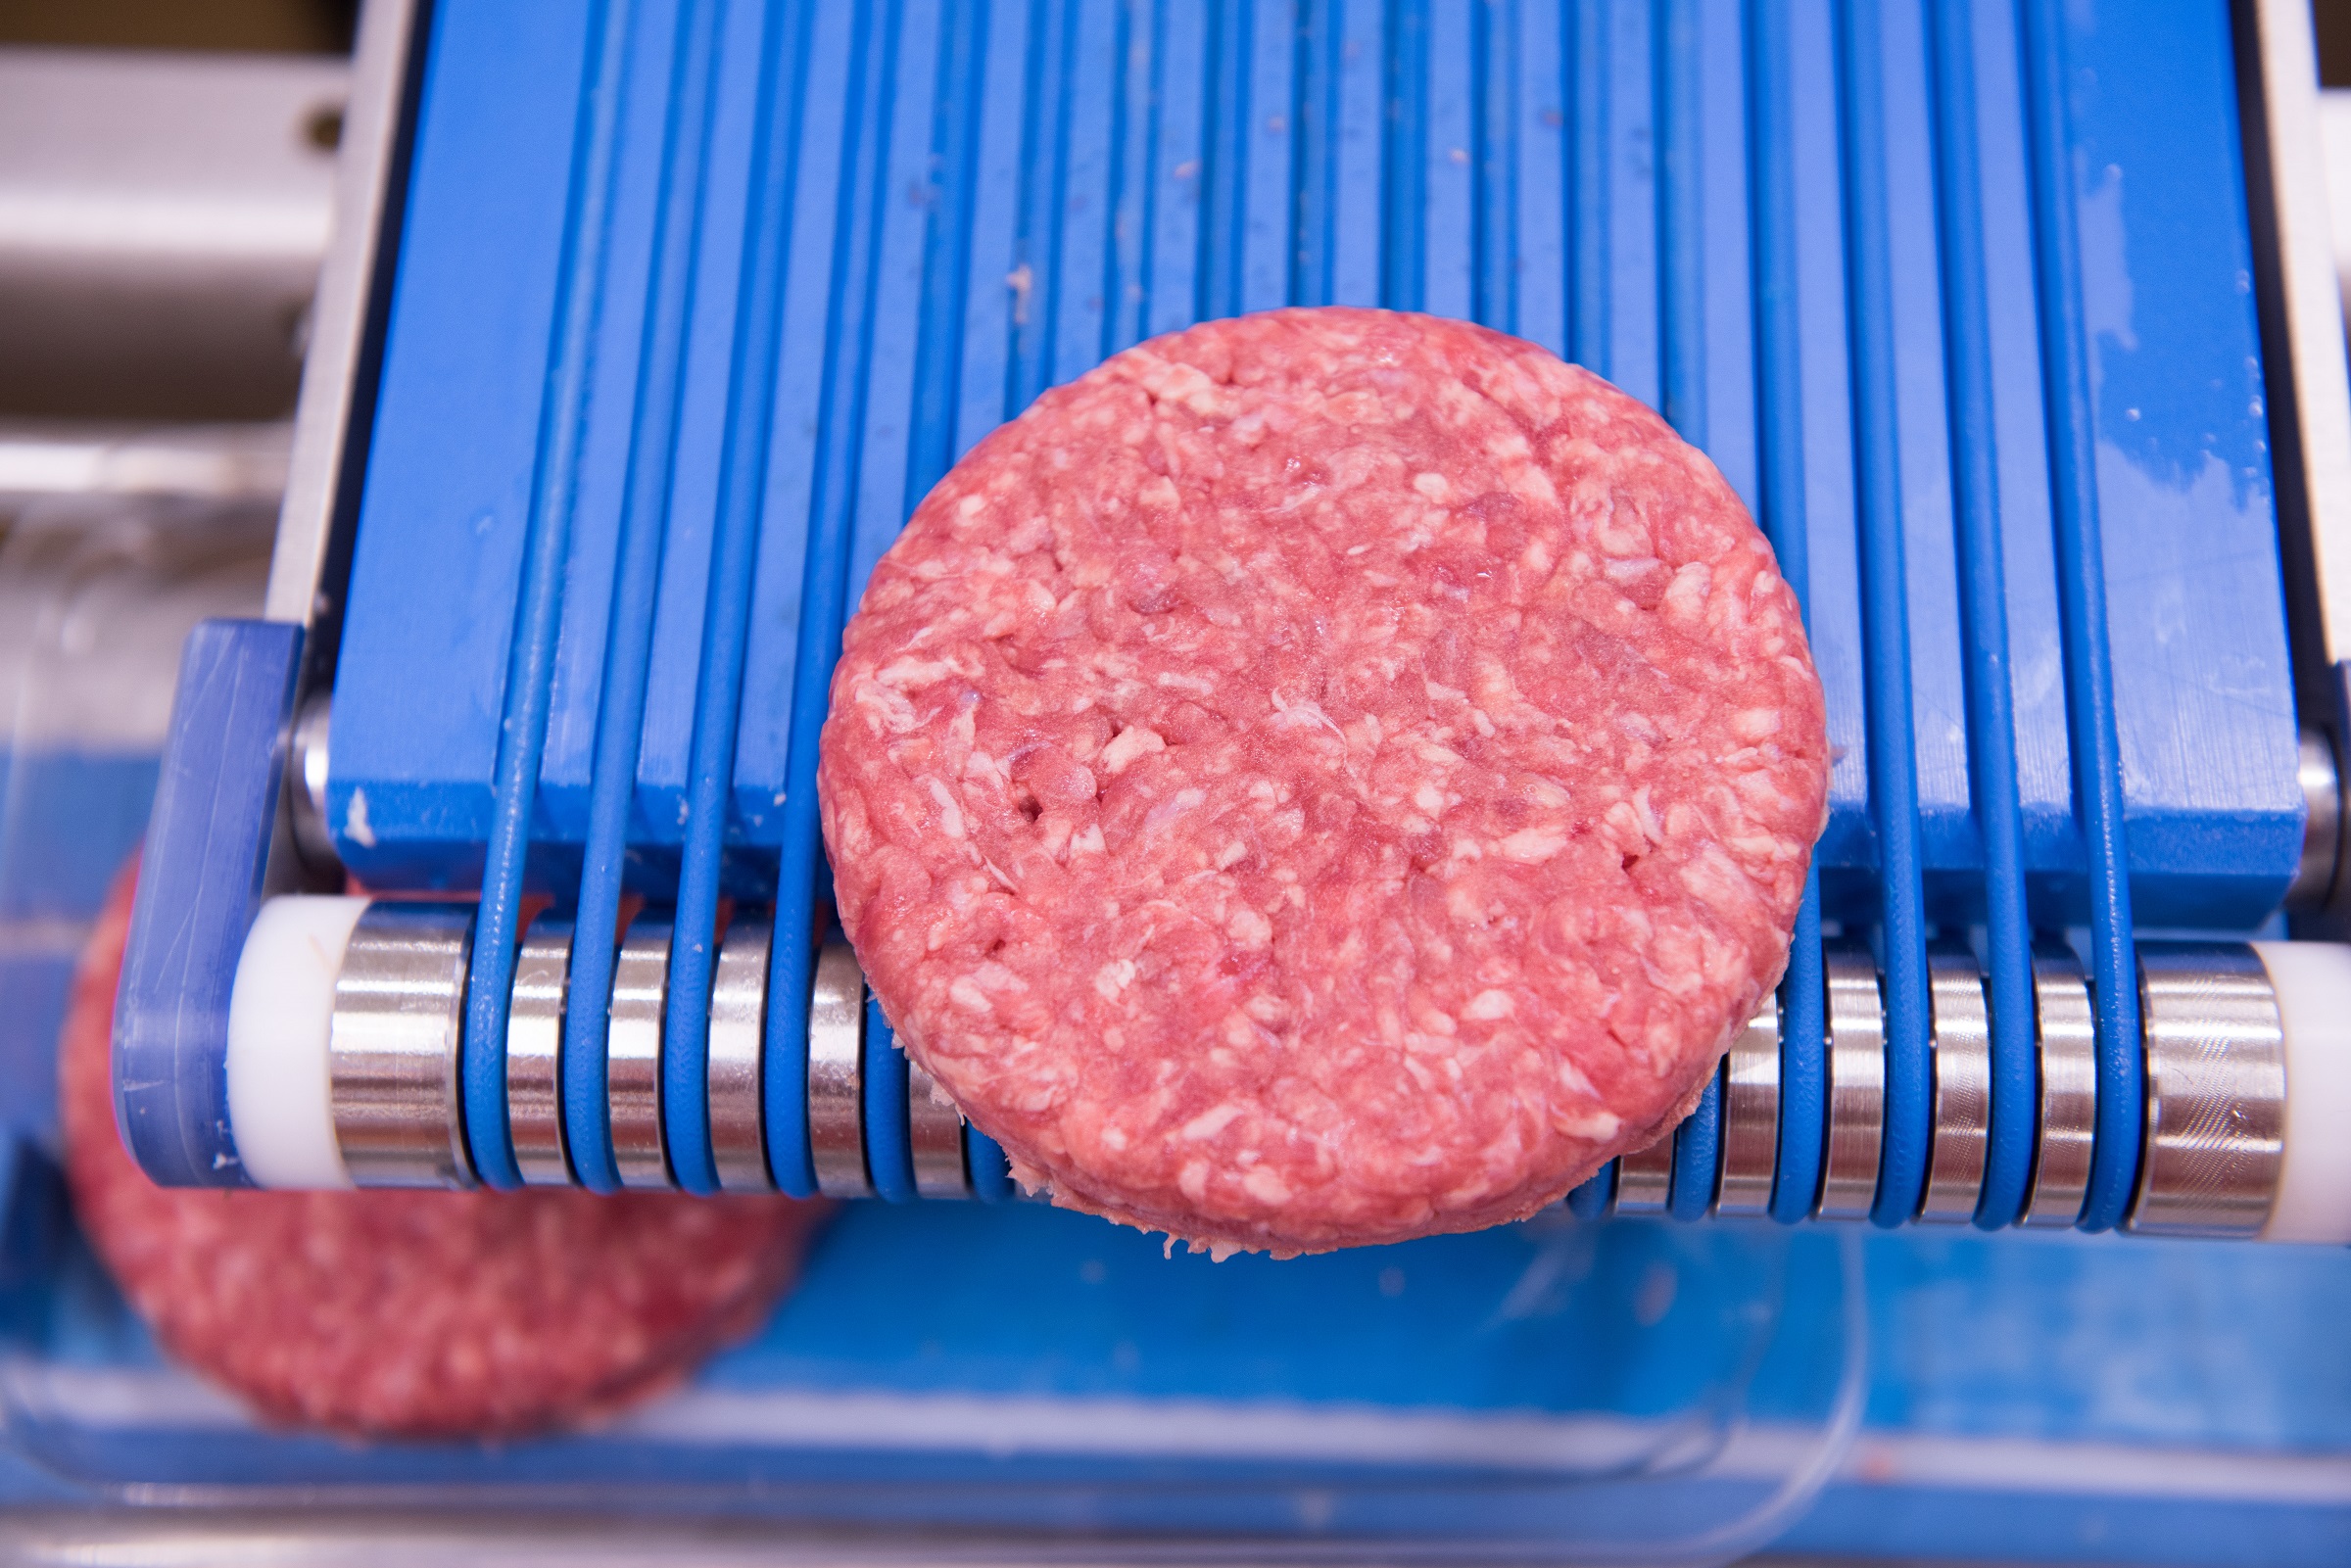 The appearance of a burger patty, in an uncooked and a cooked state, will strongly influence the buyer decision process.